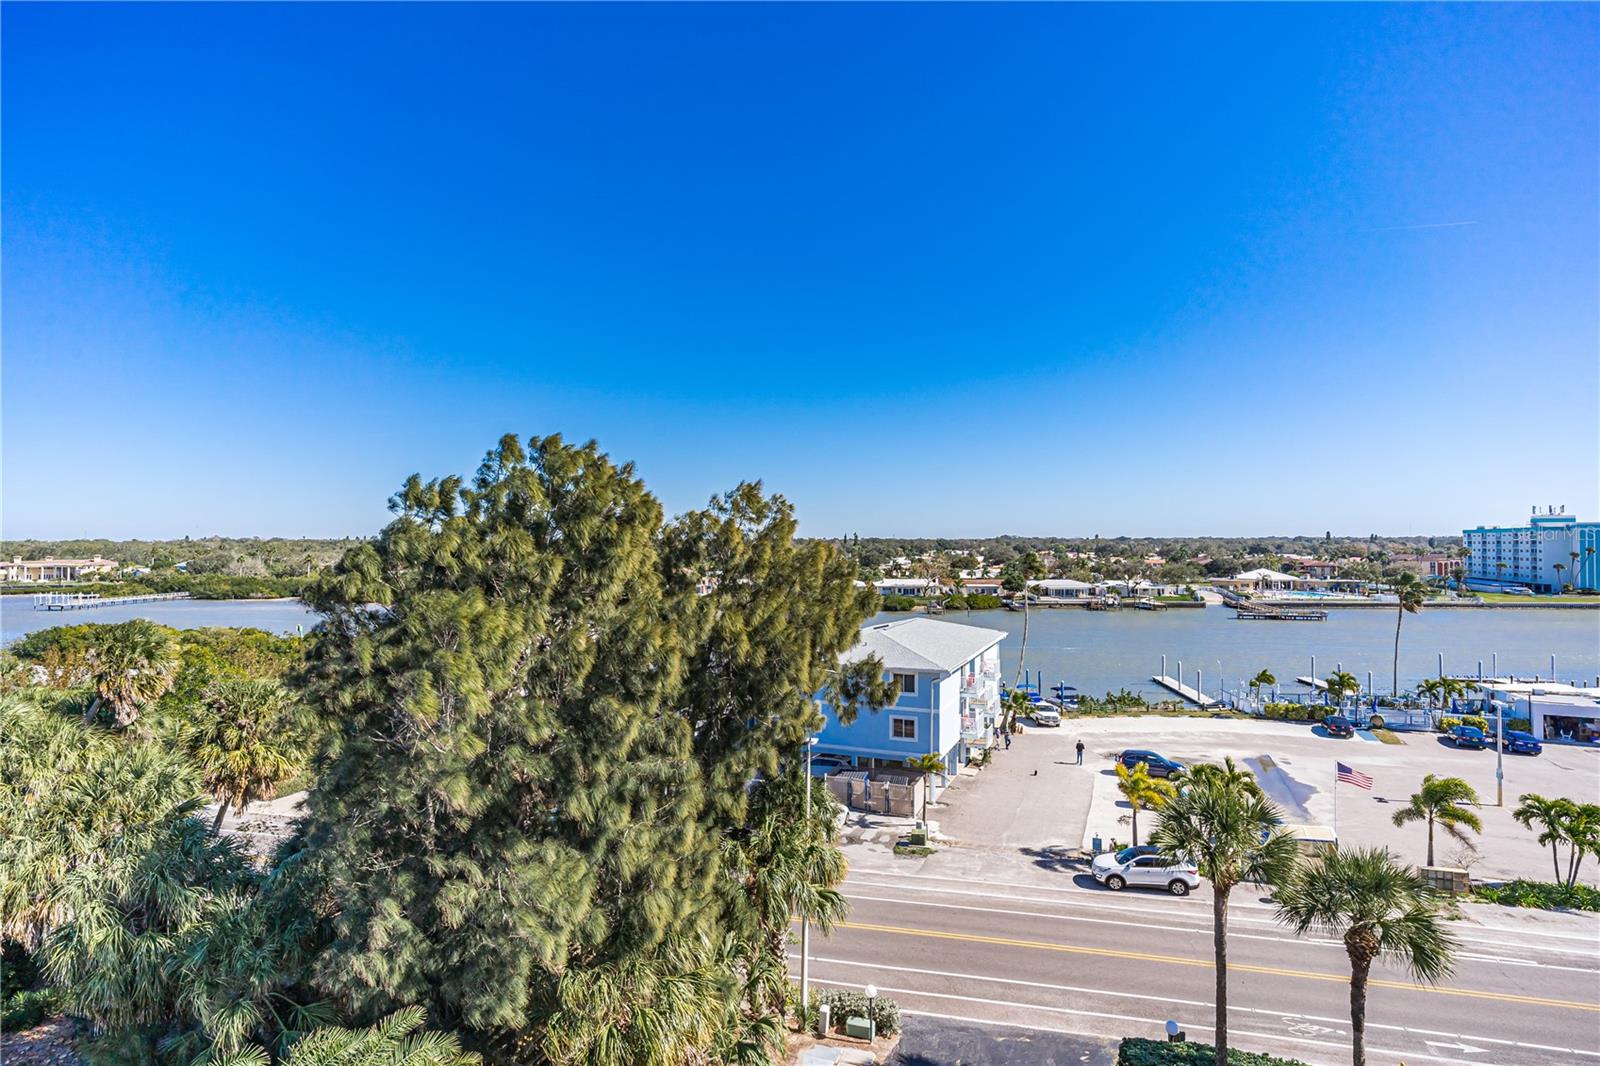 View of the Intracoastal Waterway across Gulf Blvd